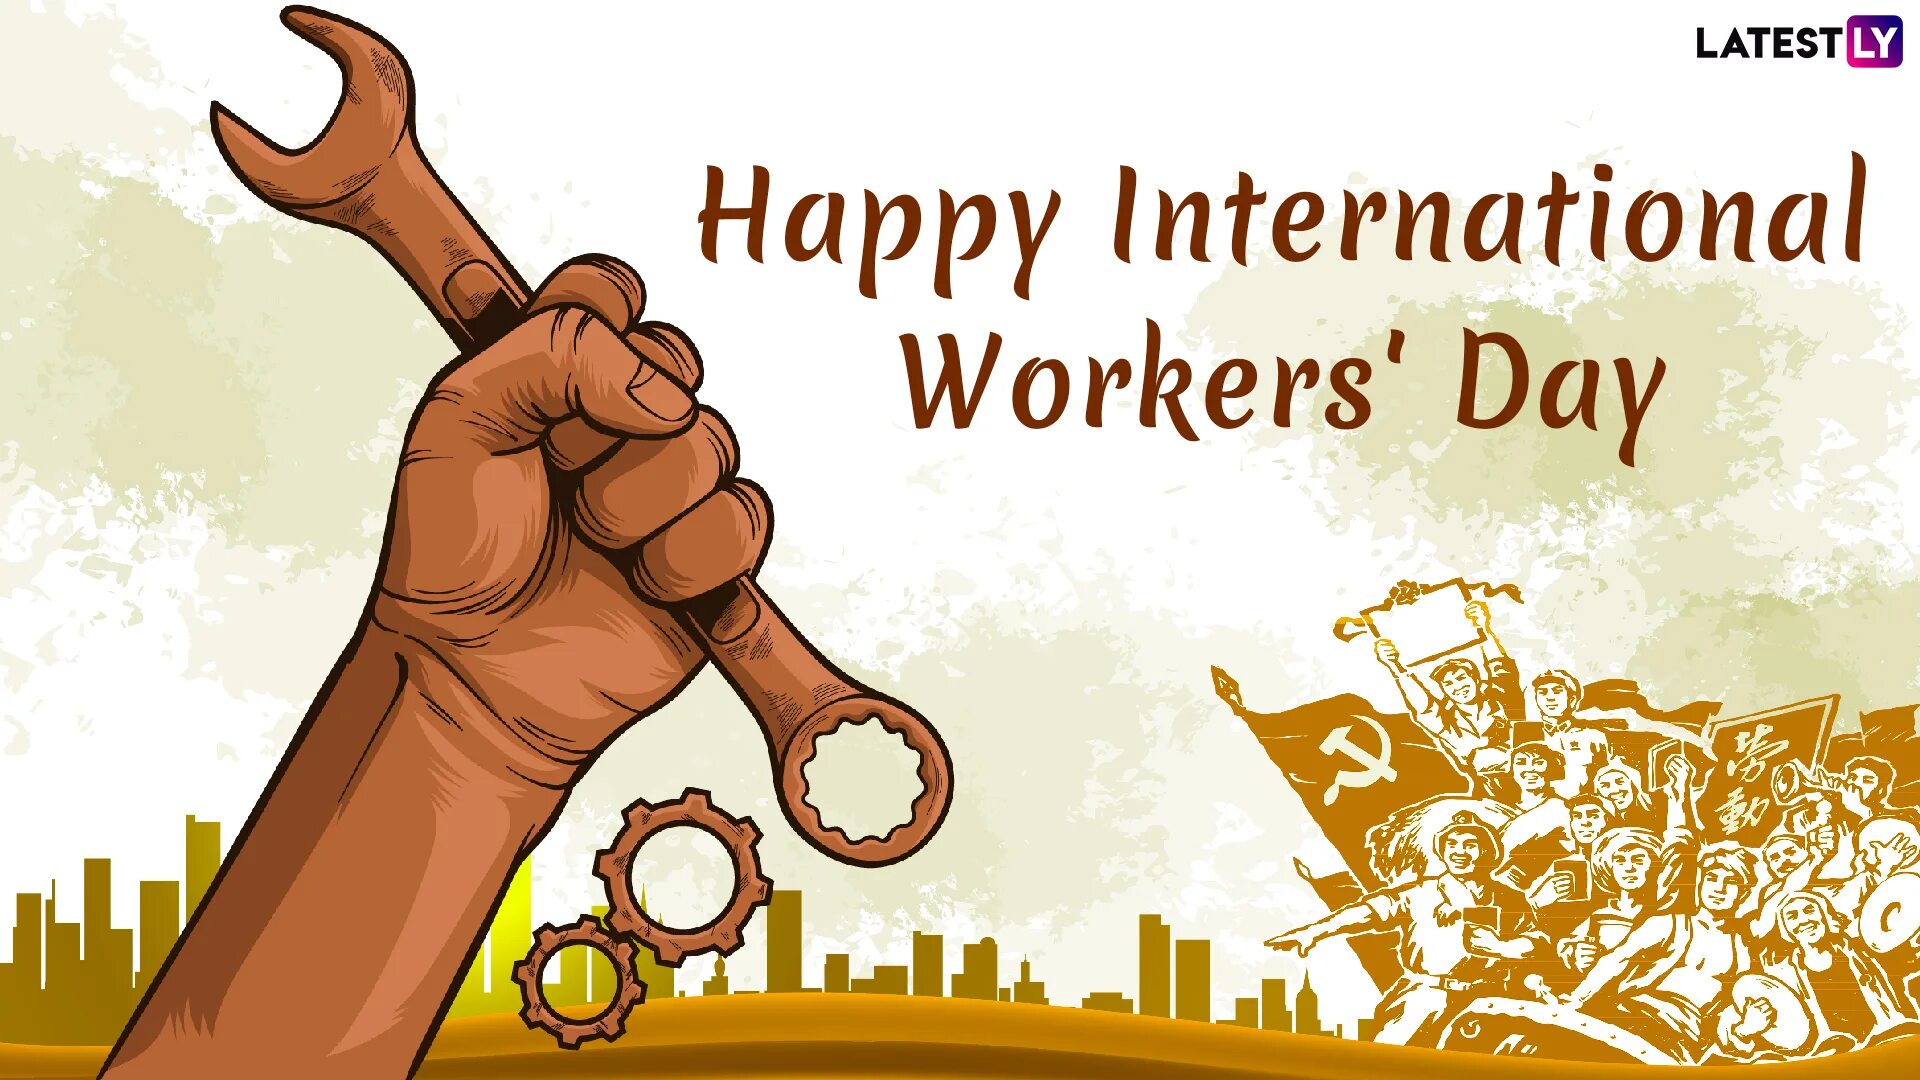 Happy may day. International workers' Day. International Labor Day. 1 May International workers' Day. 1 May Labor Day.